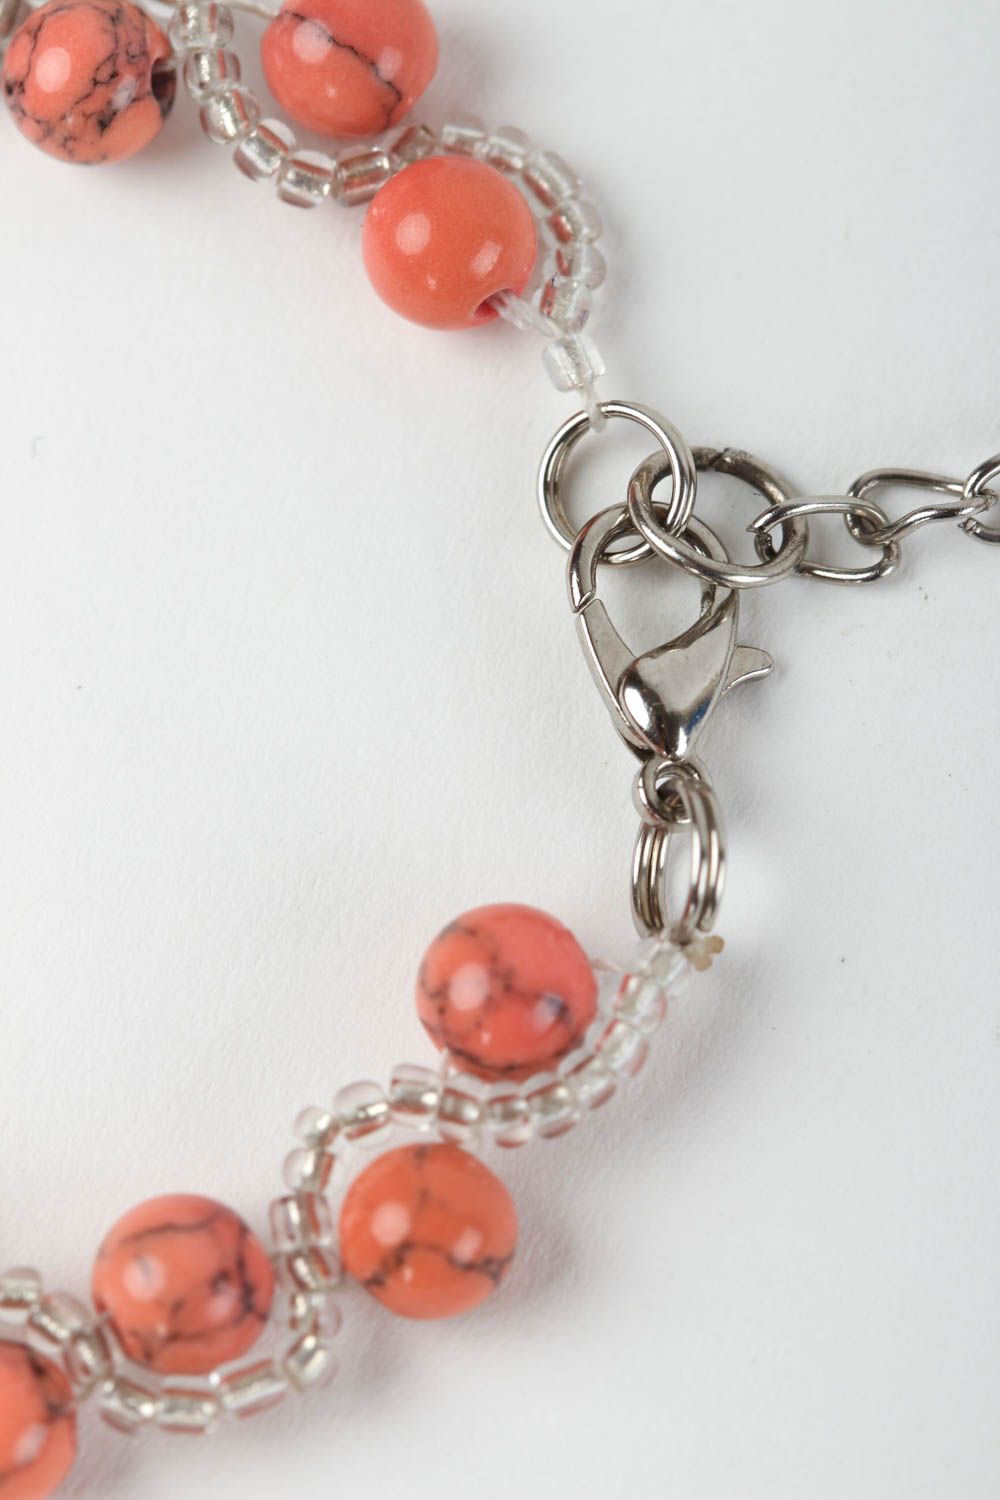 Chain line handmade beaded pale red wrist bracelet with natural stones for women and girls photo 4